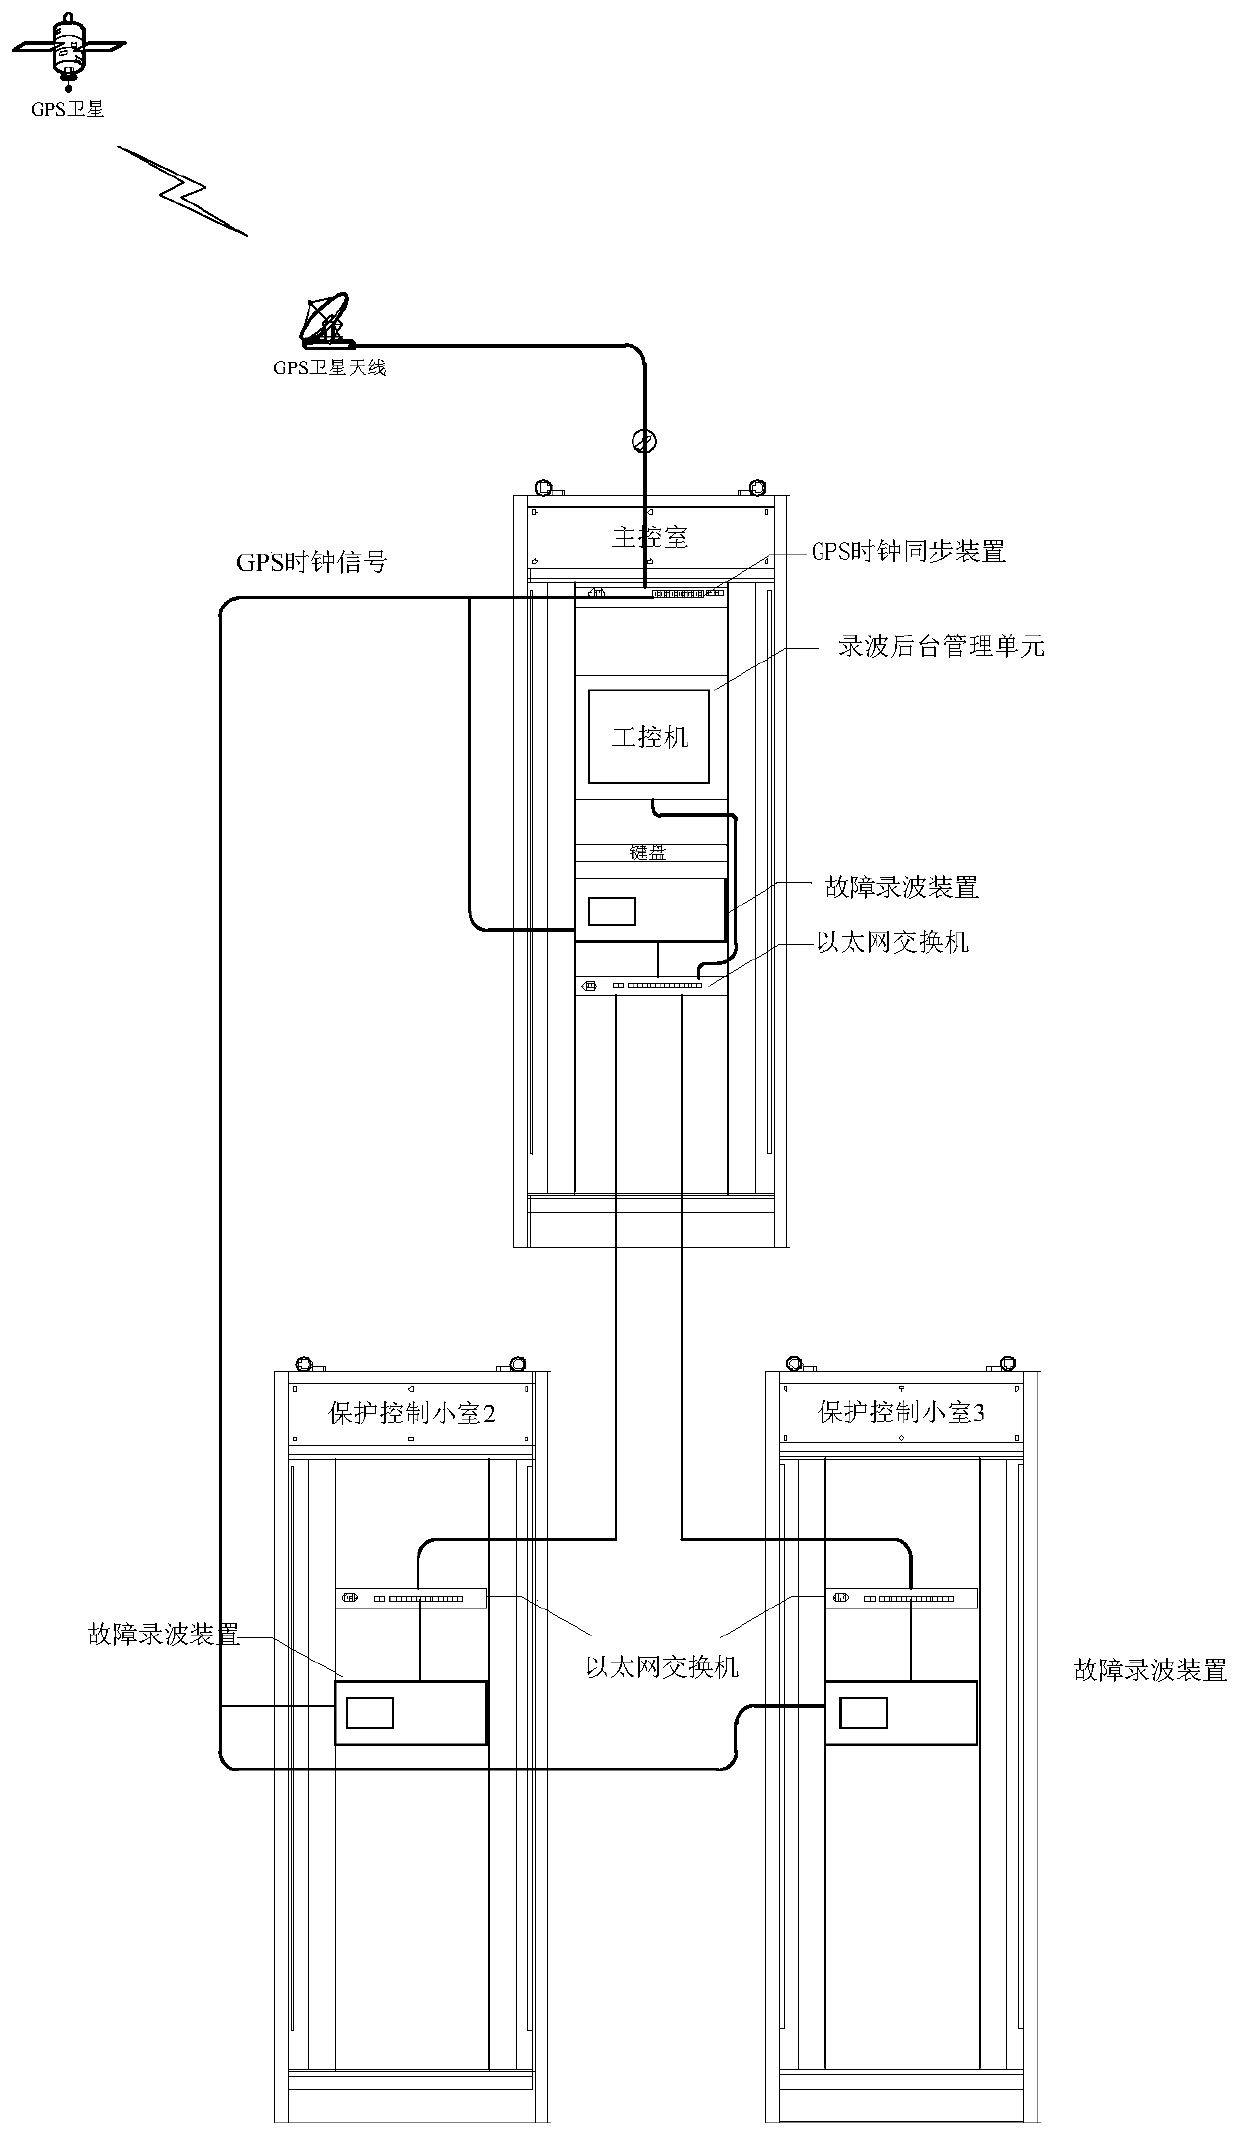 Fault recording device, decentralized fault recording system and method